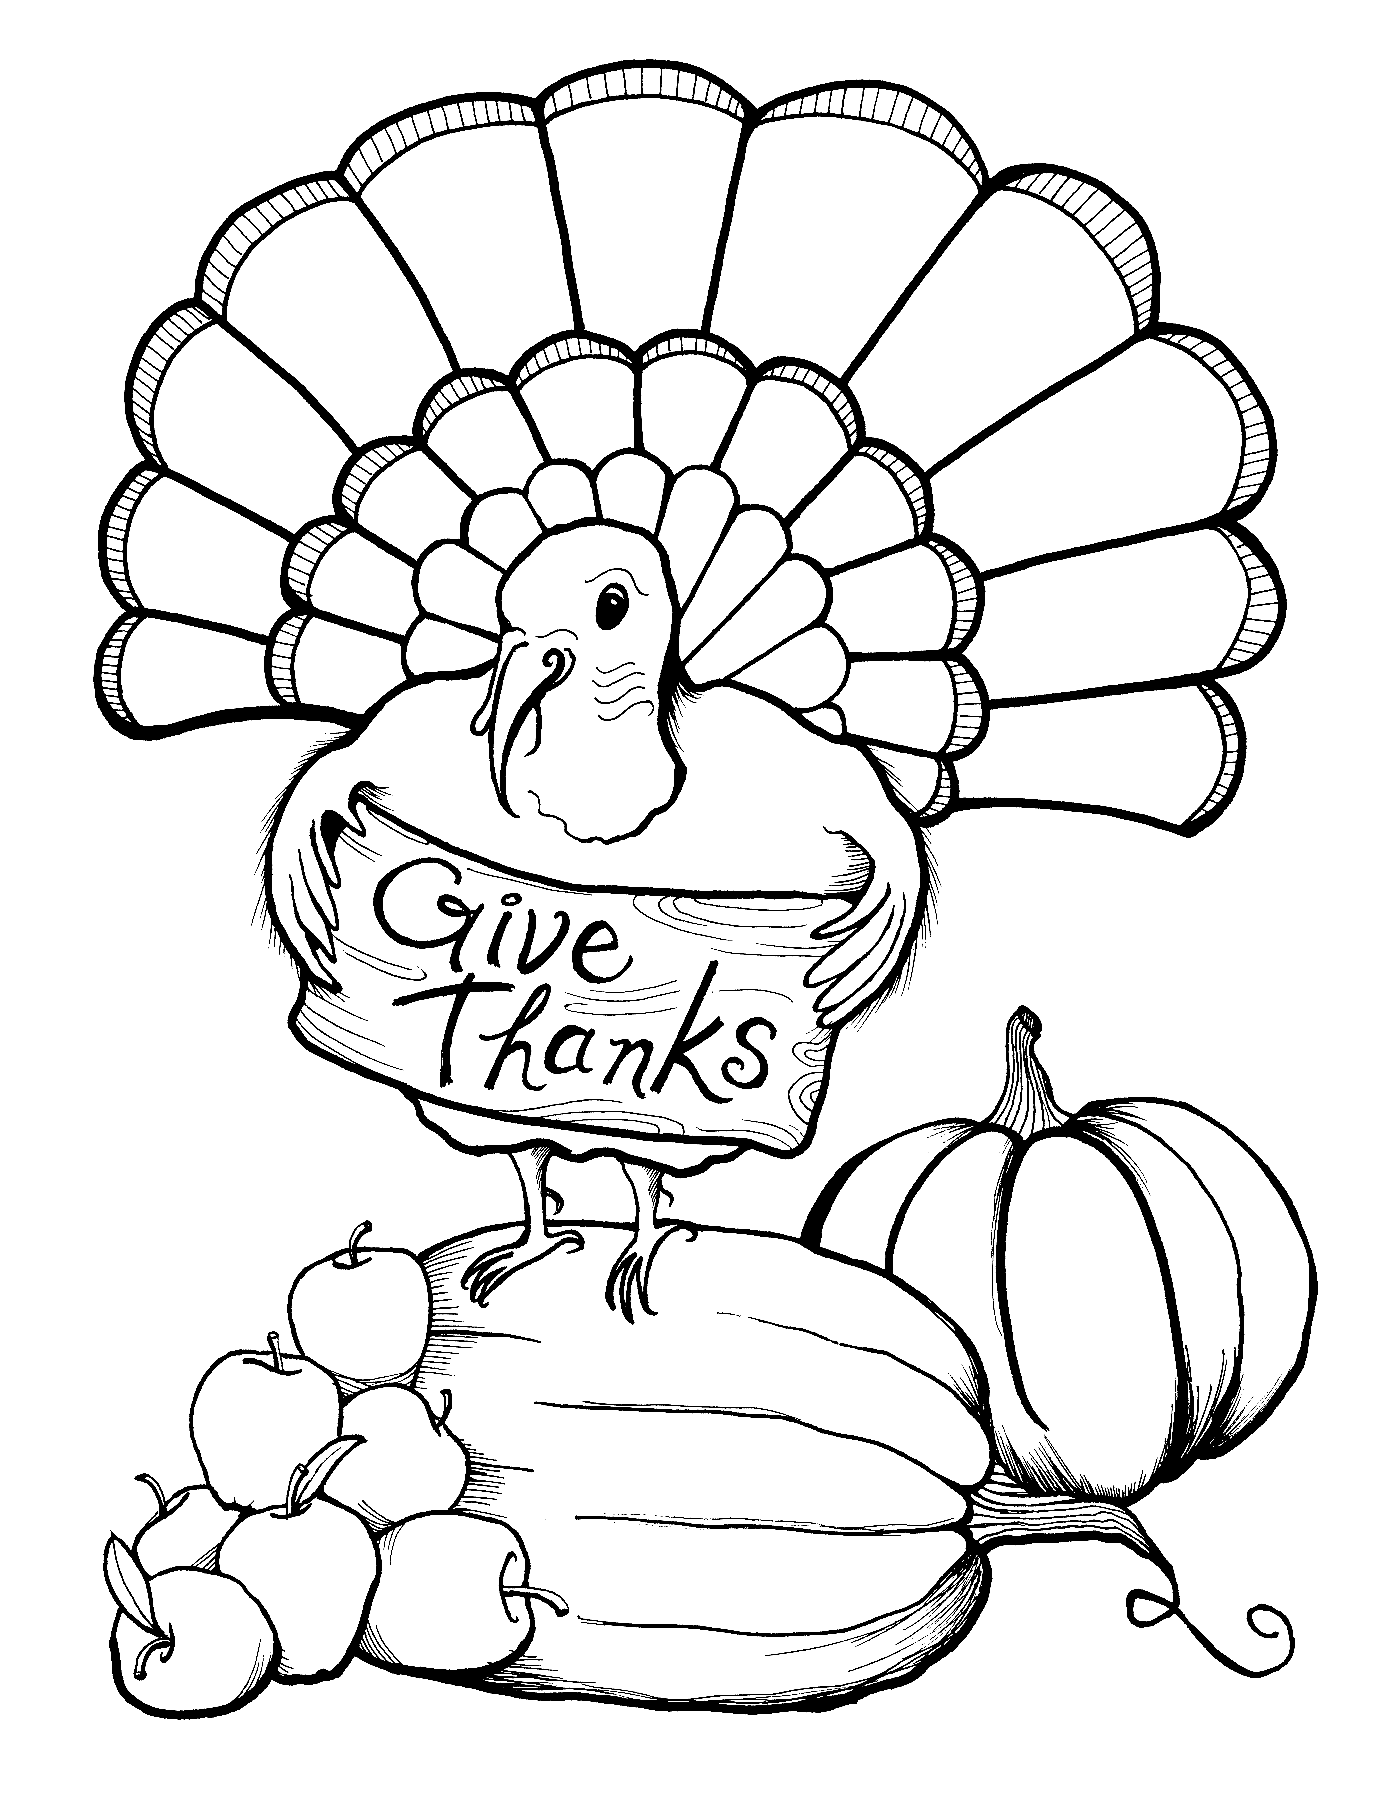 Give Thanks November Coloring Pages